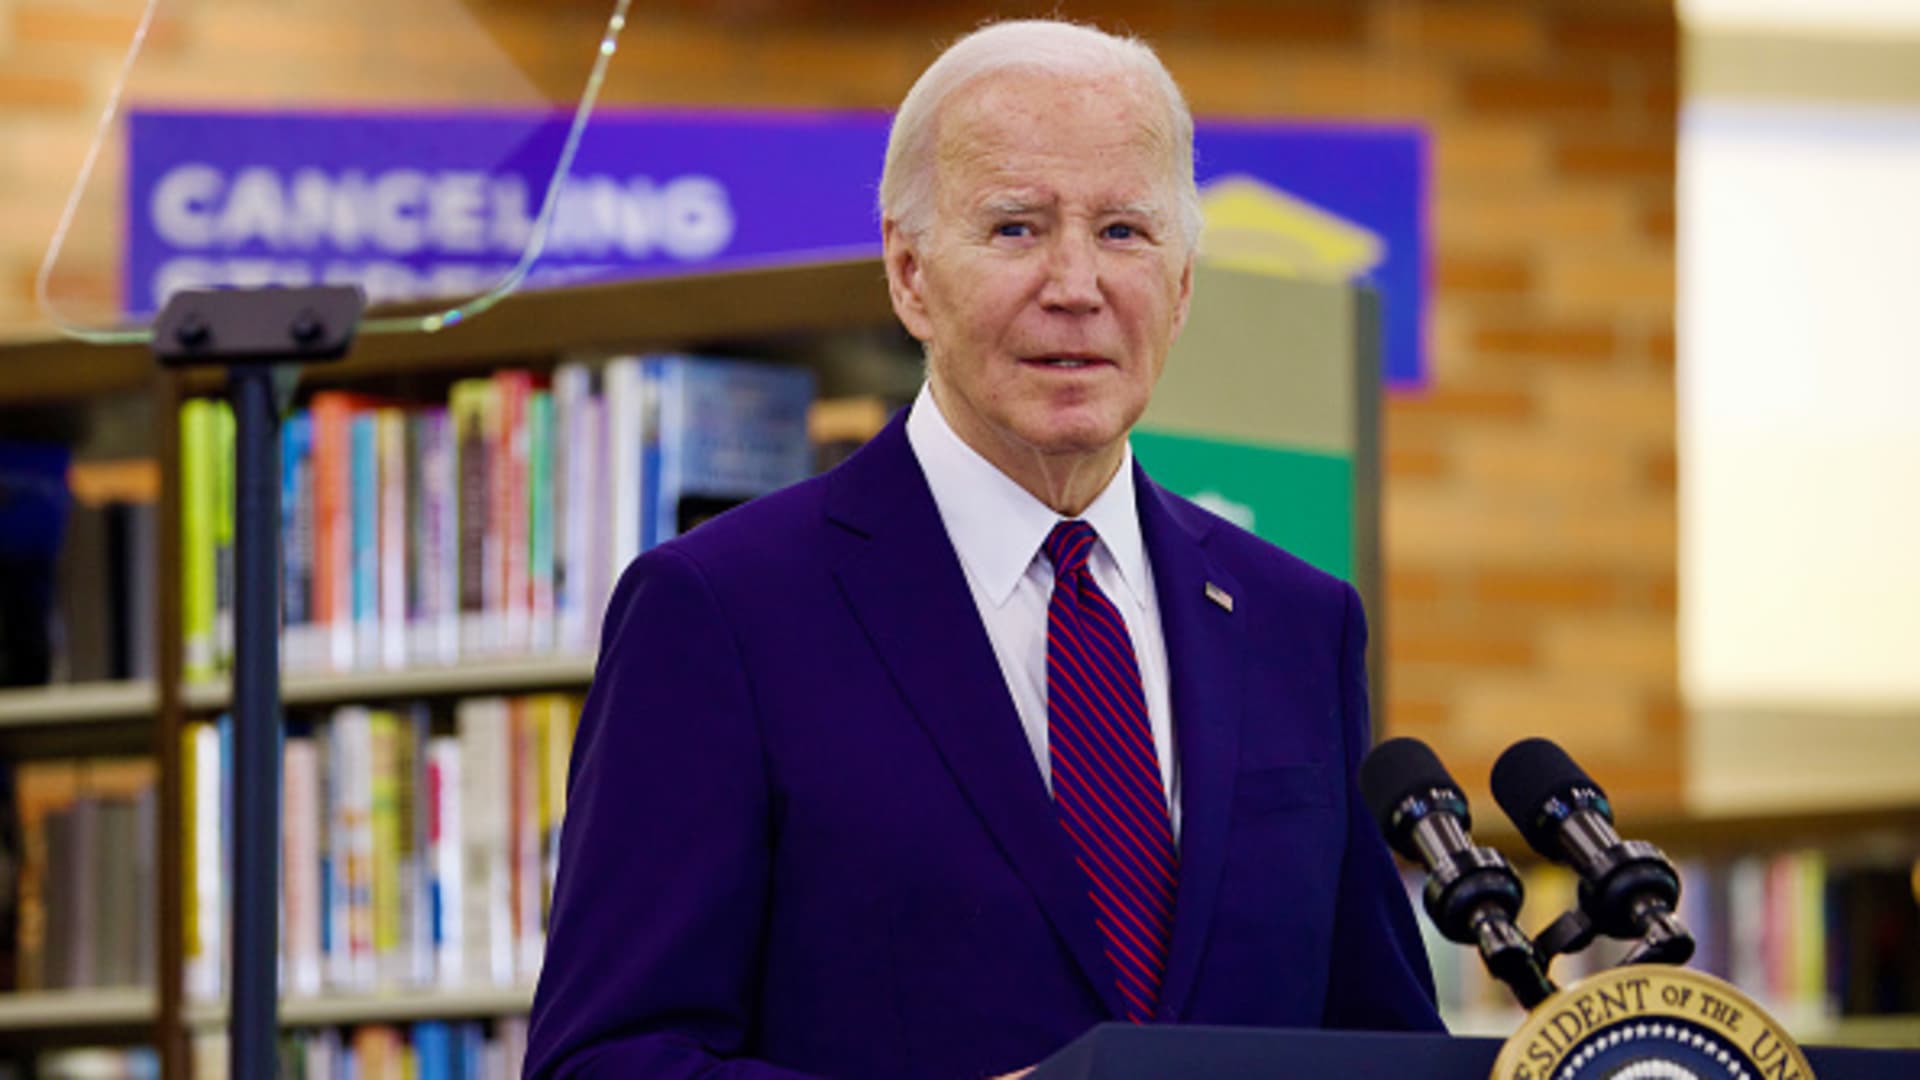 Biden will announce new student loan forgiveness plan affecting tens of millions of Americans